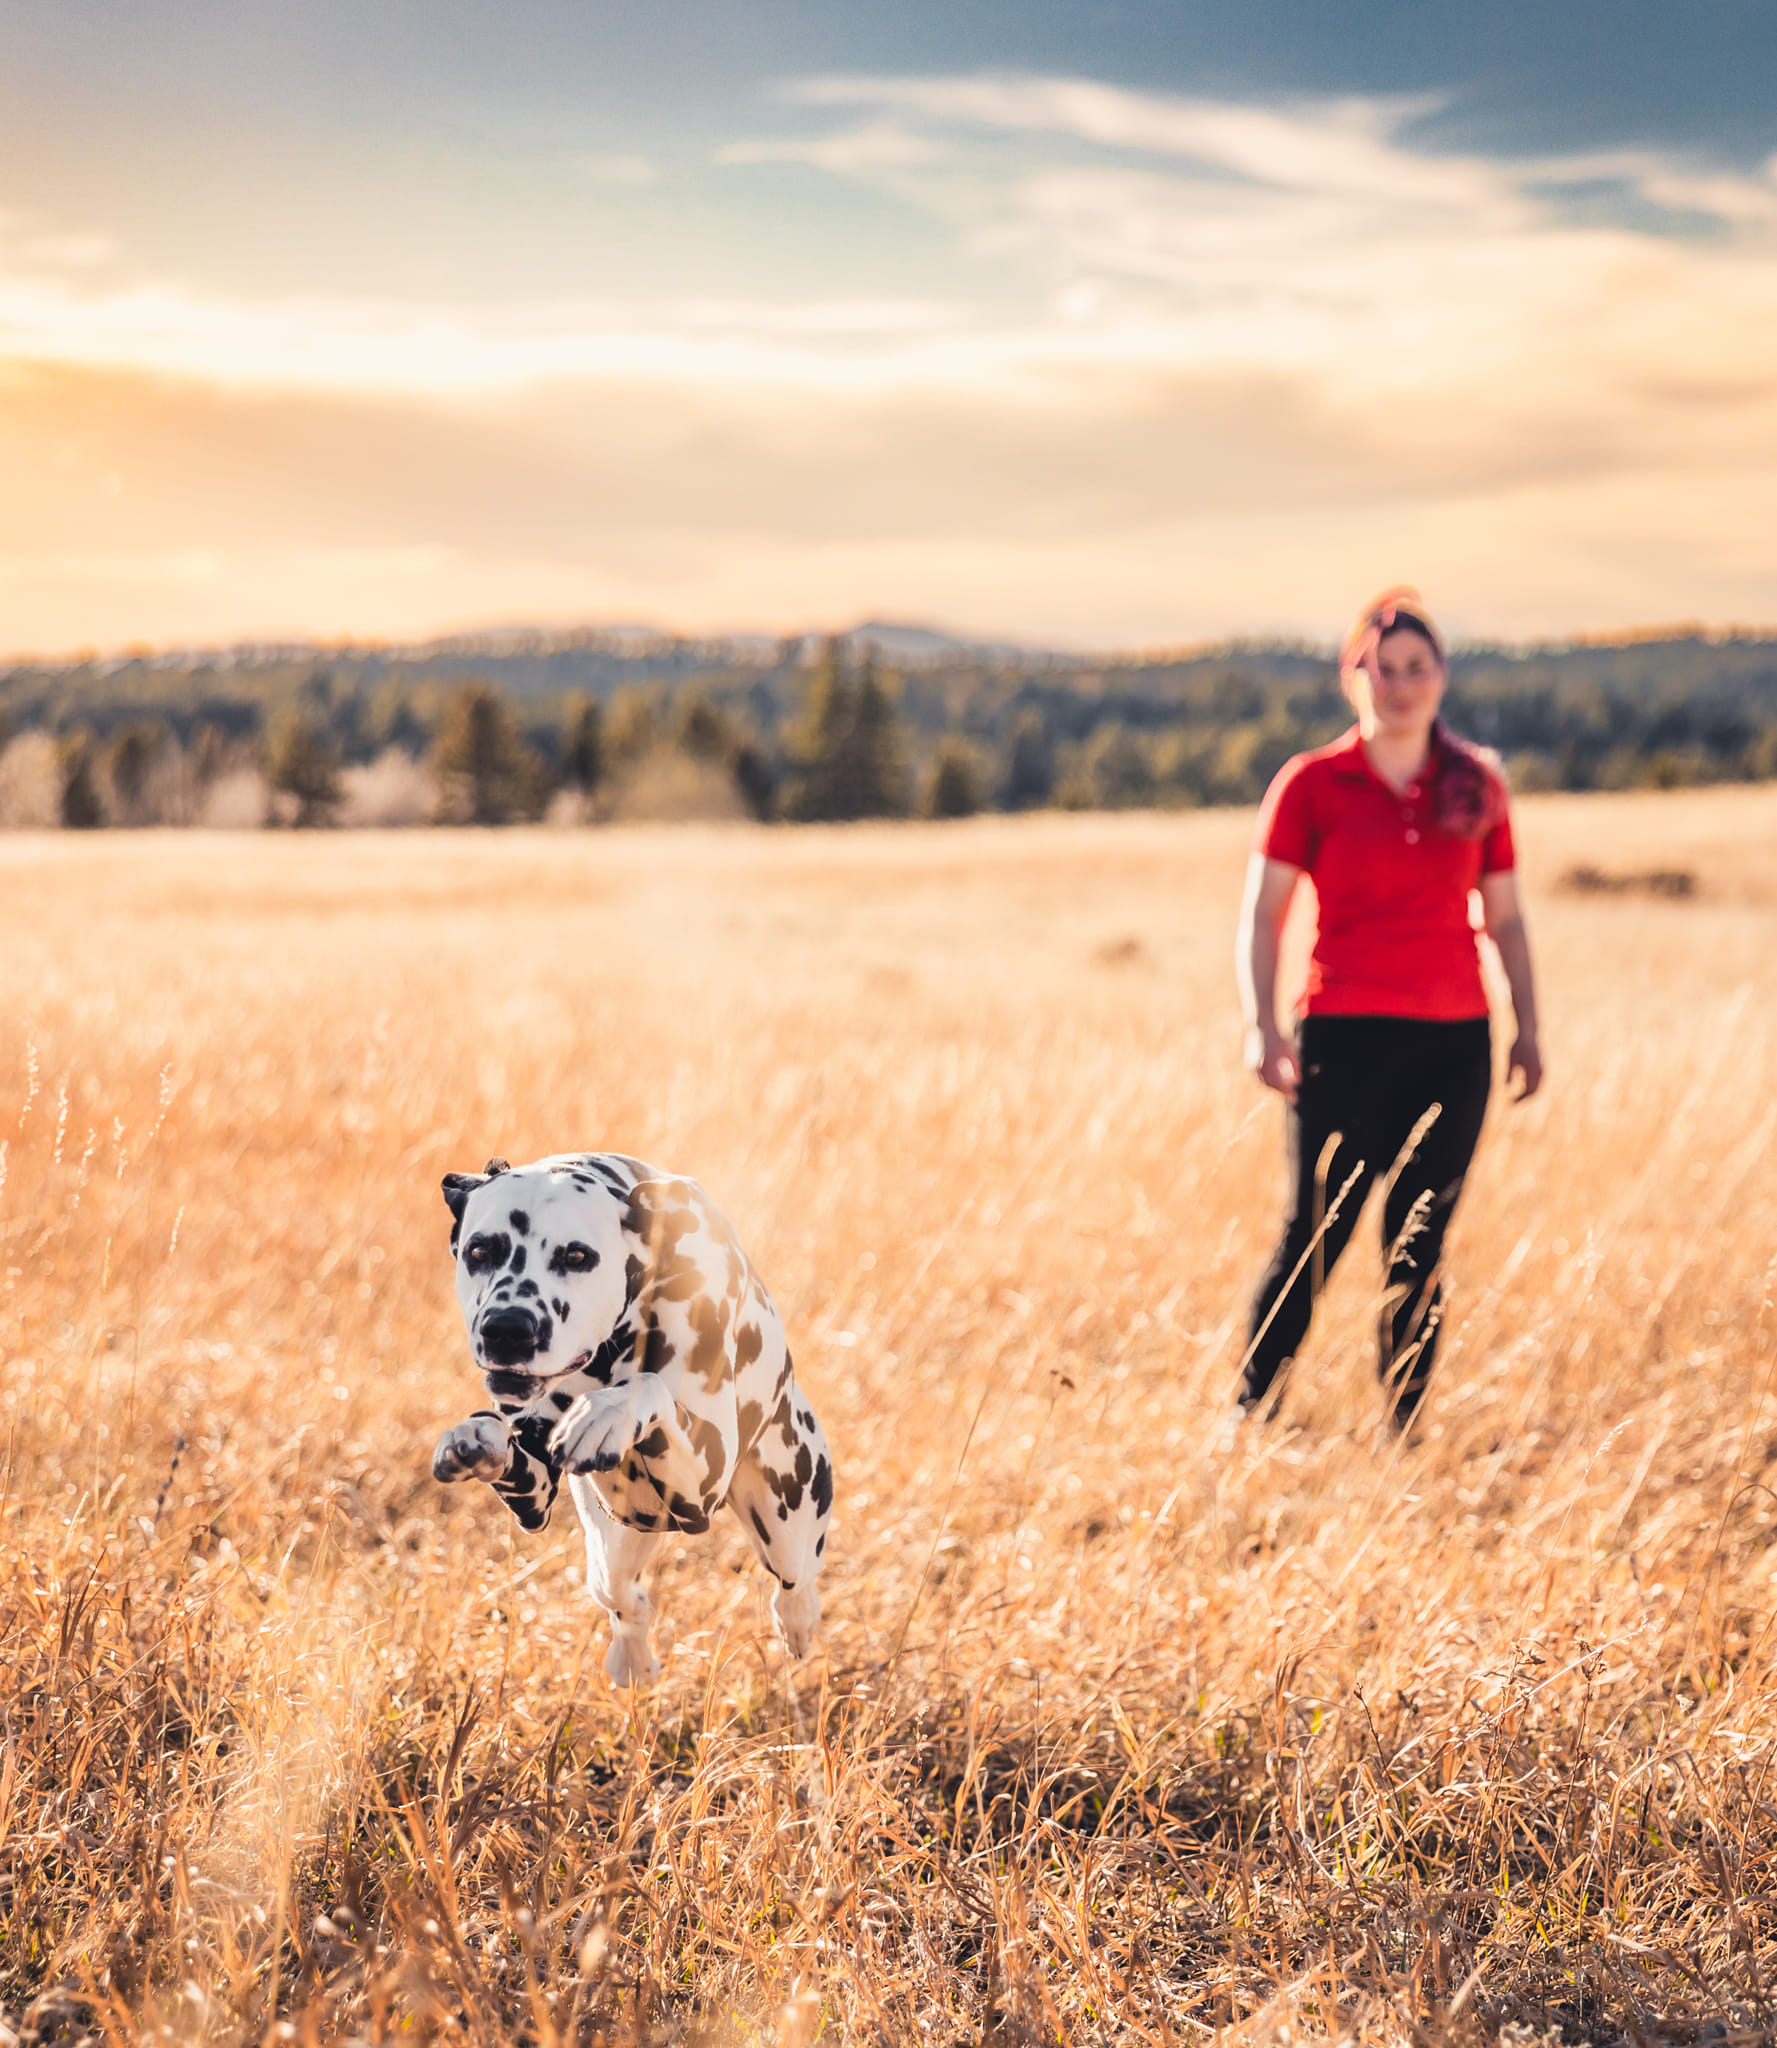 Dalmatian runs off-leash towards camera on beautiful outdoor field with trainer in the background